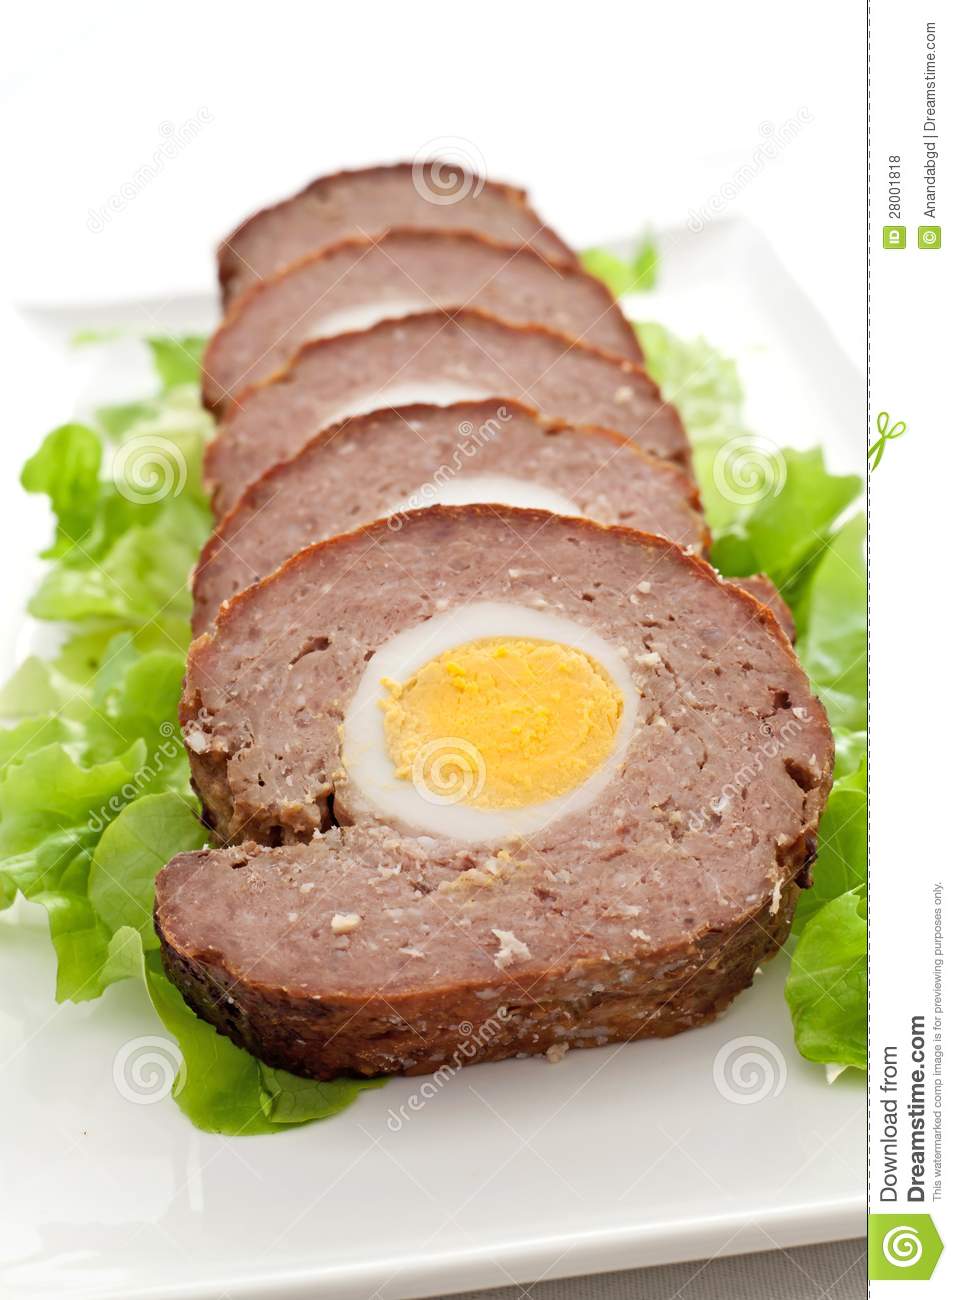 Meat Loaf Royalty Free Stock Photos   Image  28001818